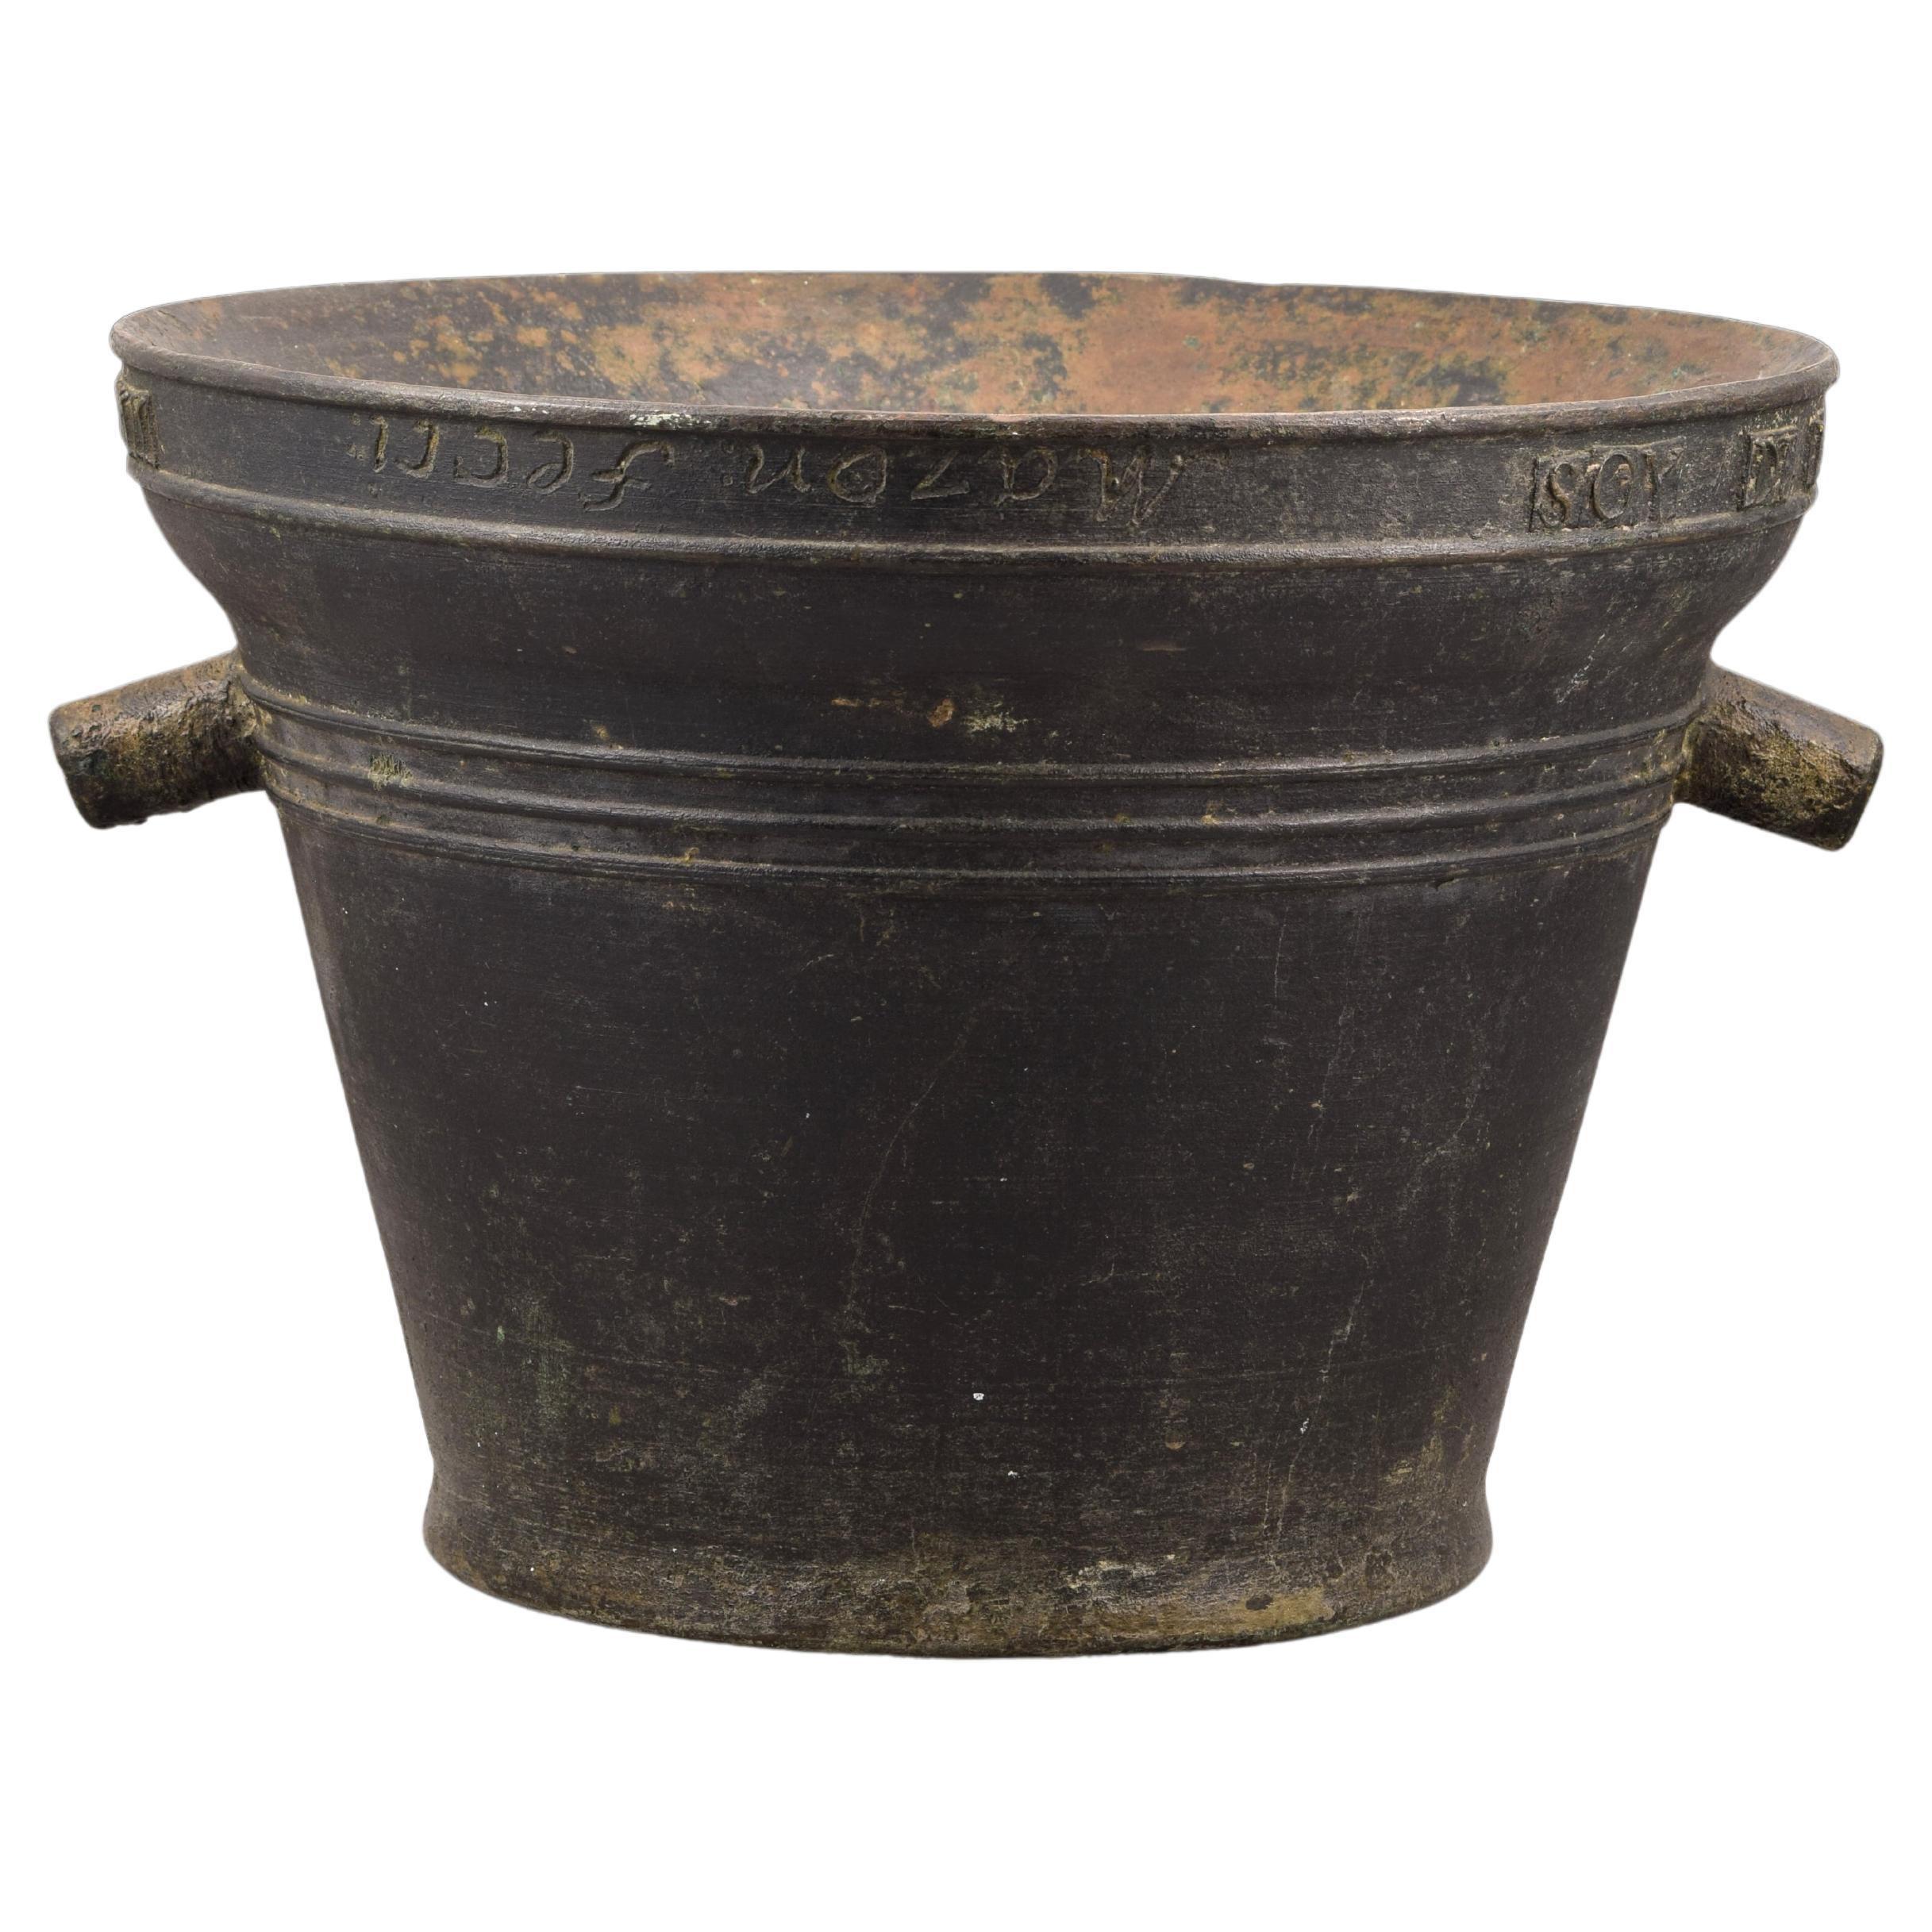 Mortar with Inscriptions. Bronze, Spain, 1823